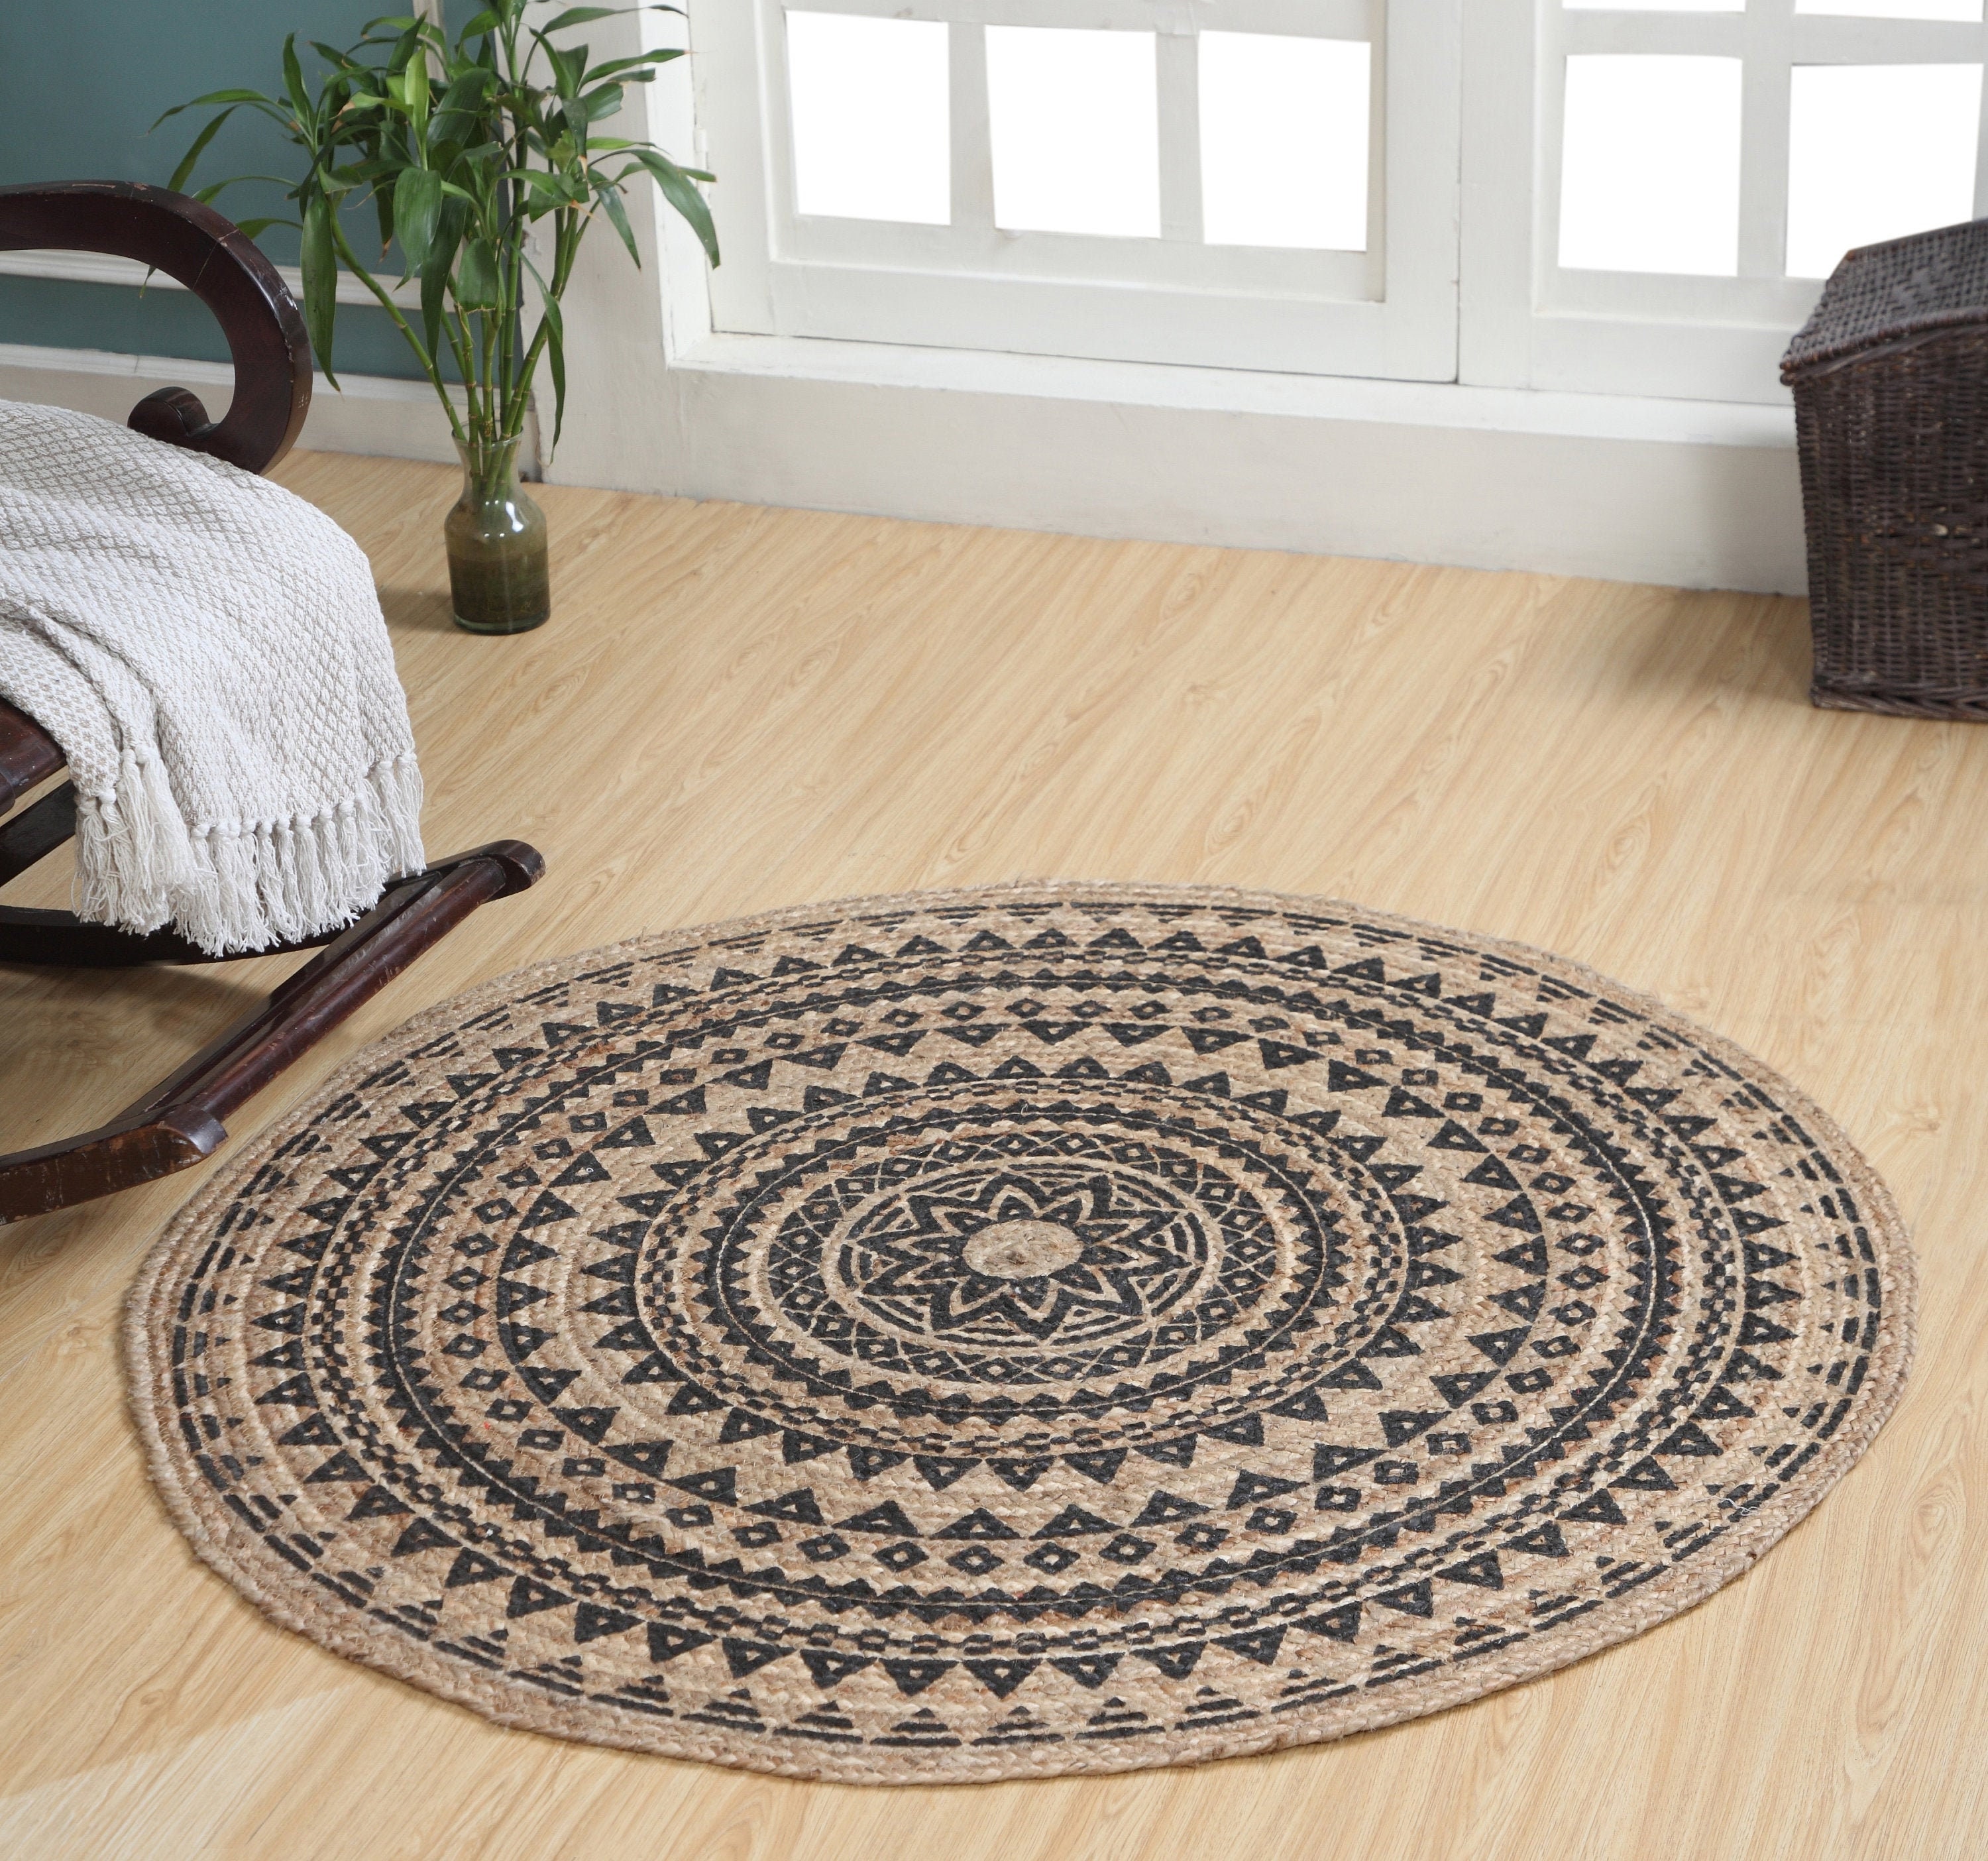 Indian Handmade Natural Jute Oval Rug With White Border Yoga Mat